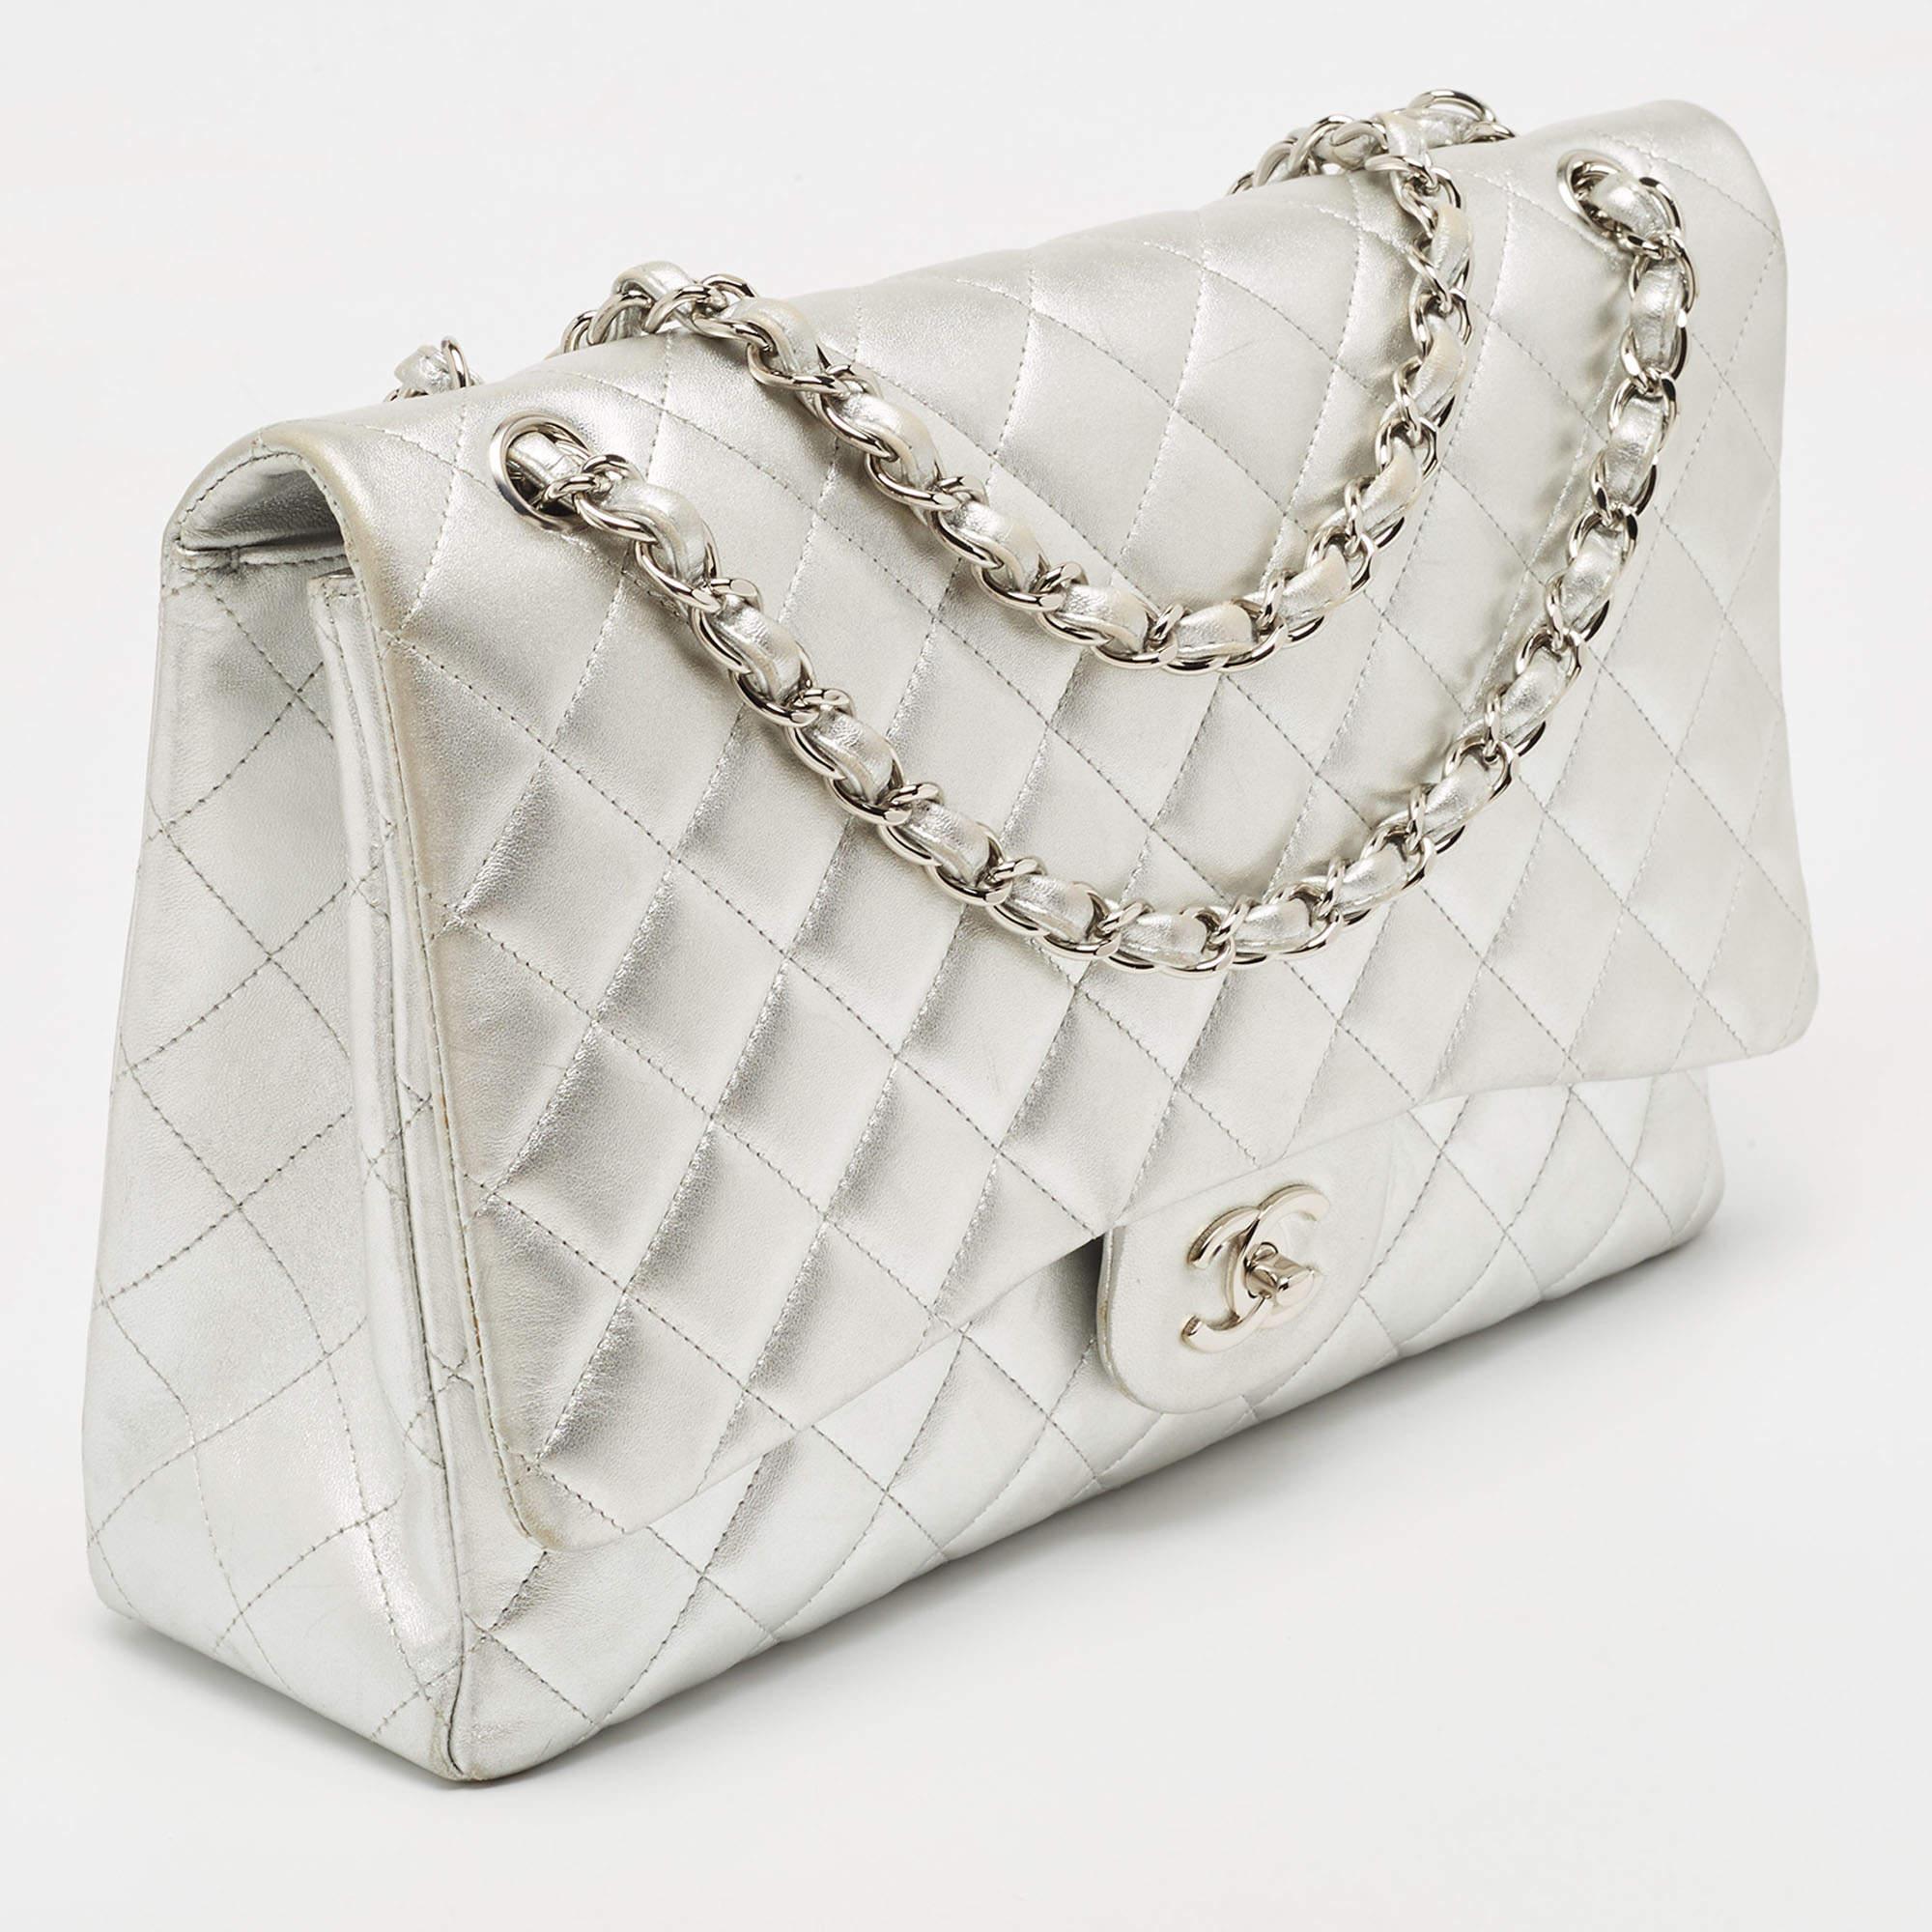 Chanel Silver Quilted Lambskin Leather Maxi Classic Single Flap Bag In Good Condition For Sale In Dubai, Al Qouz 2